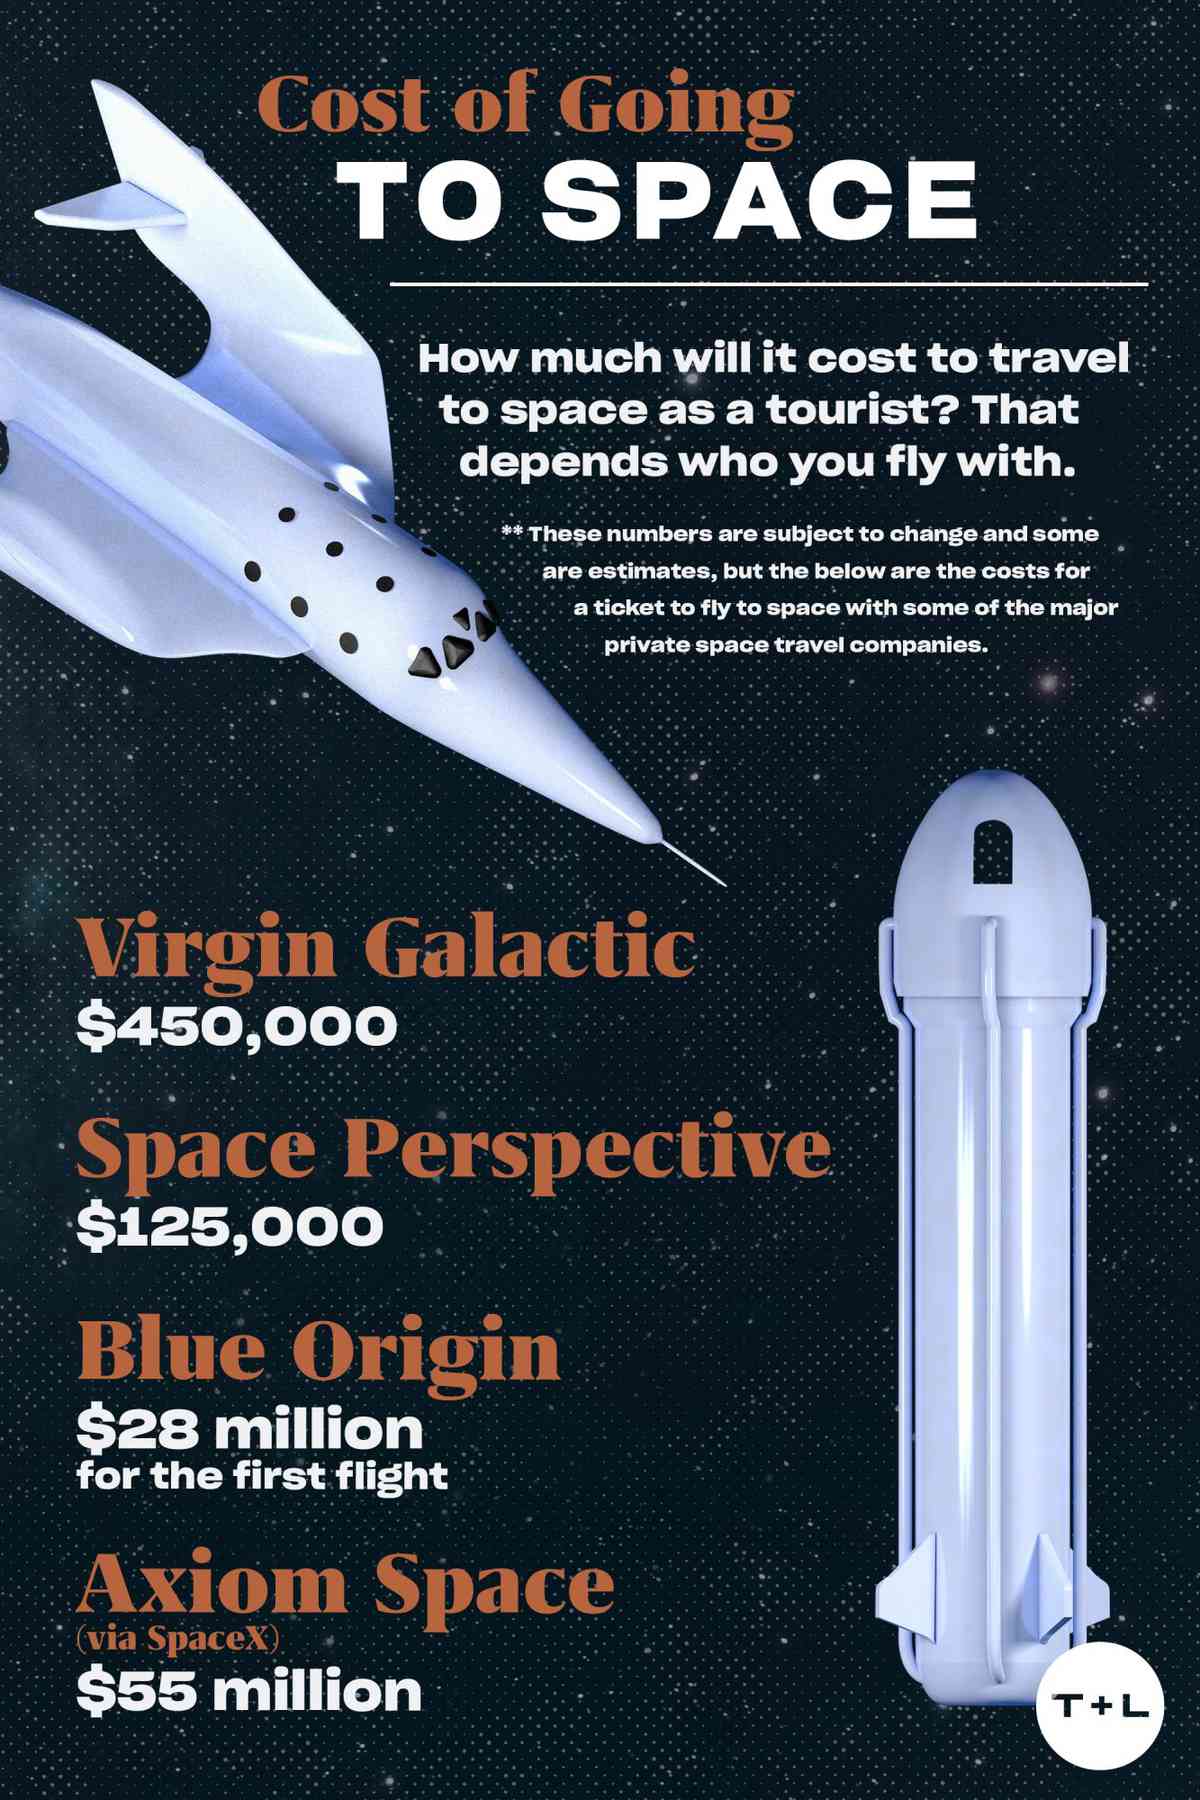 space tourism facts